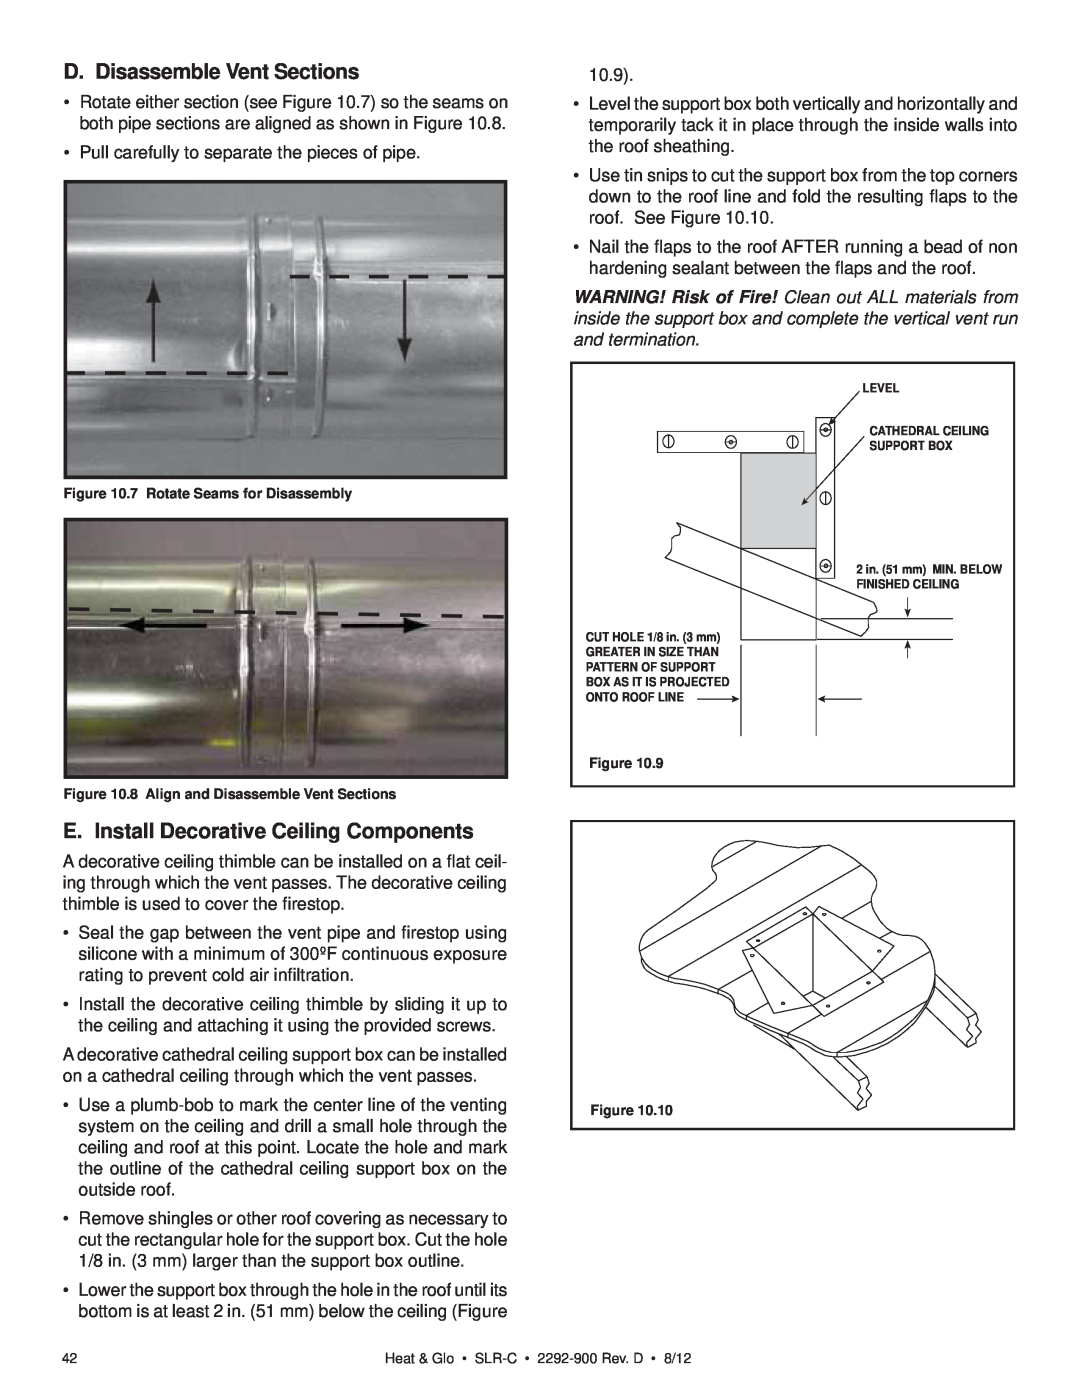 Heat & Glo LifeStyle SLR-C (COSMO) owner manual D. Disassemble Vent Sections, E. Install Decorative Ceiling Components 